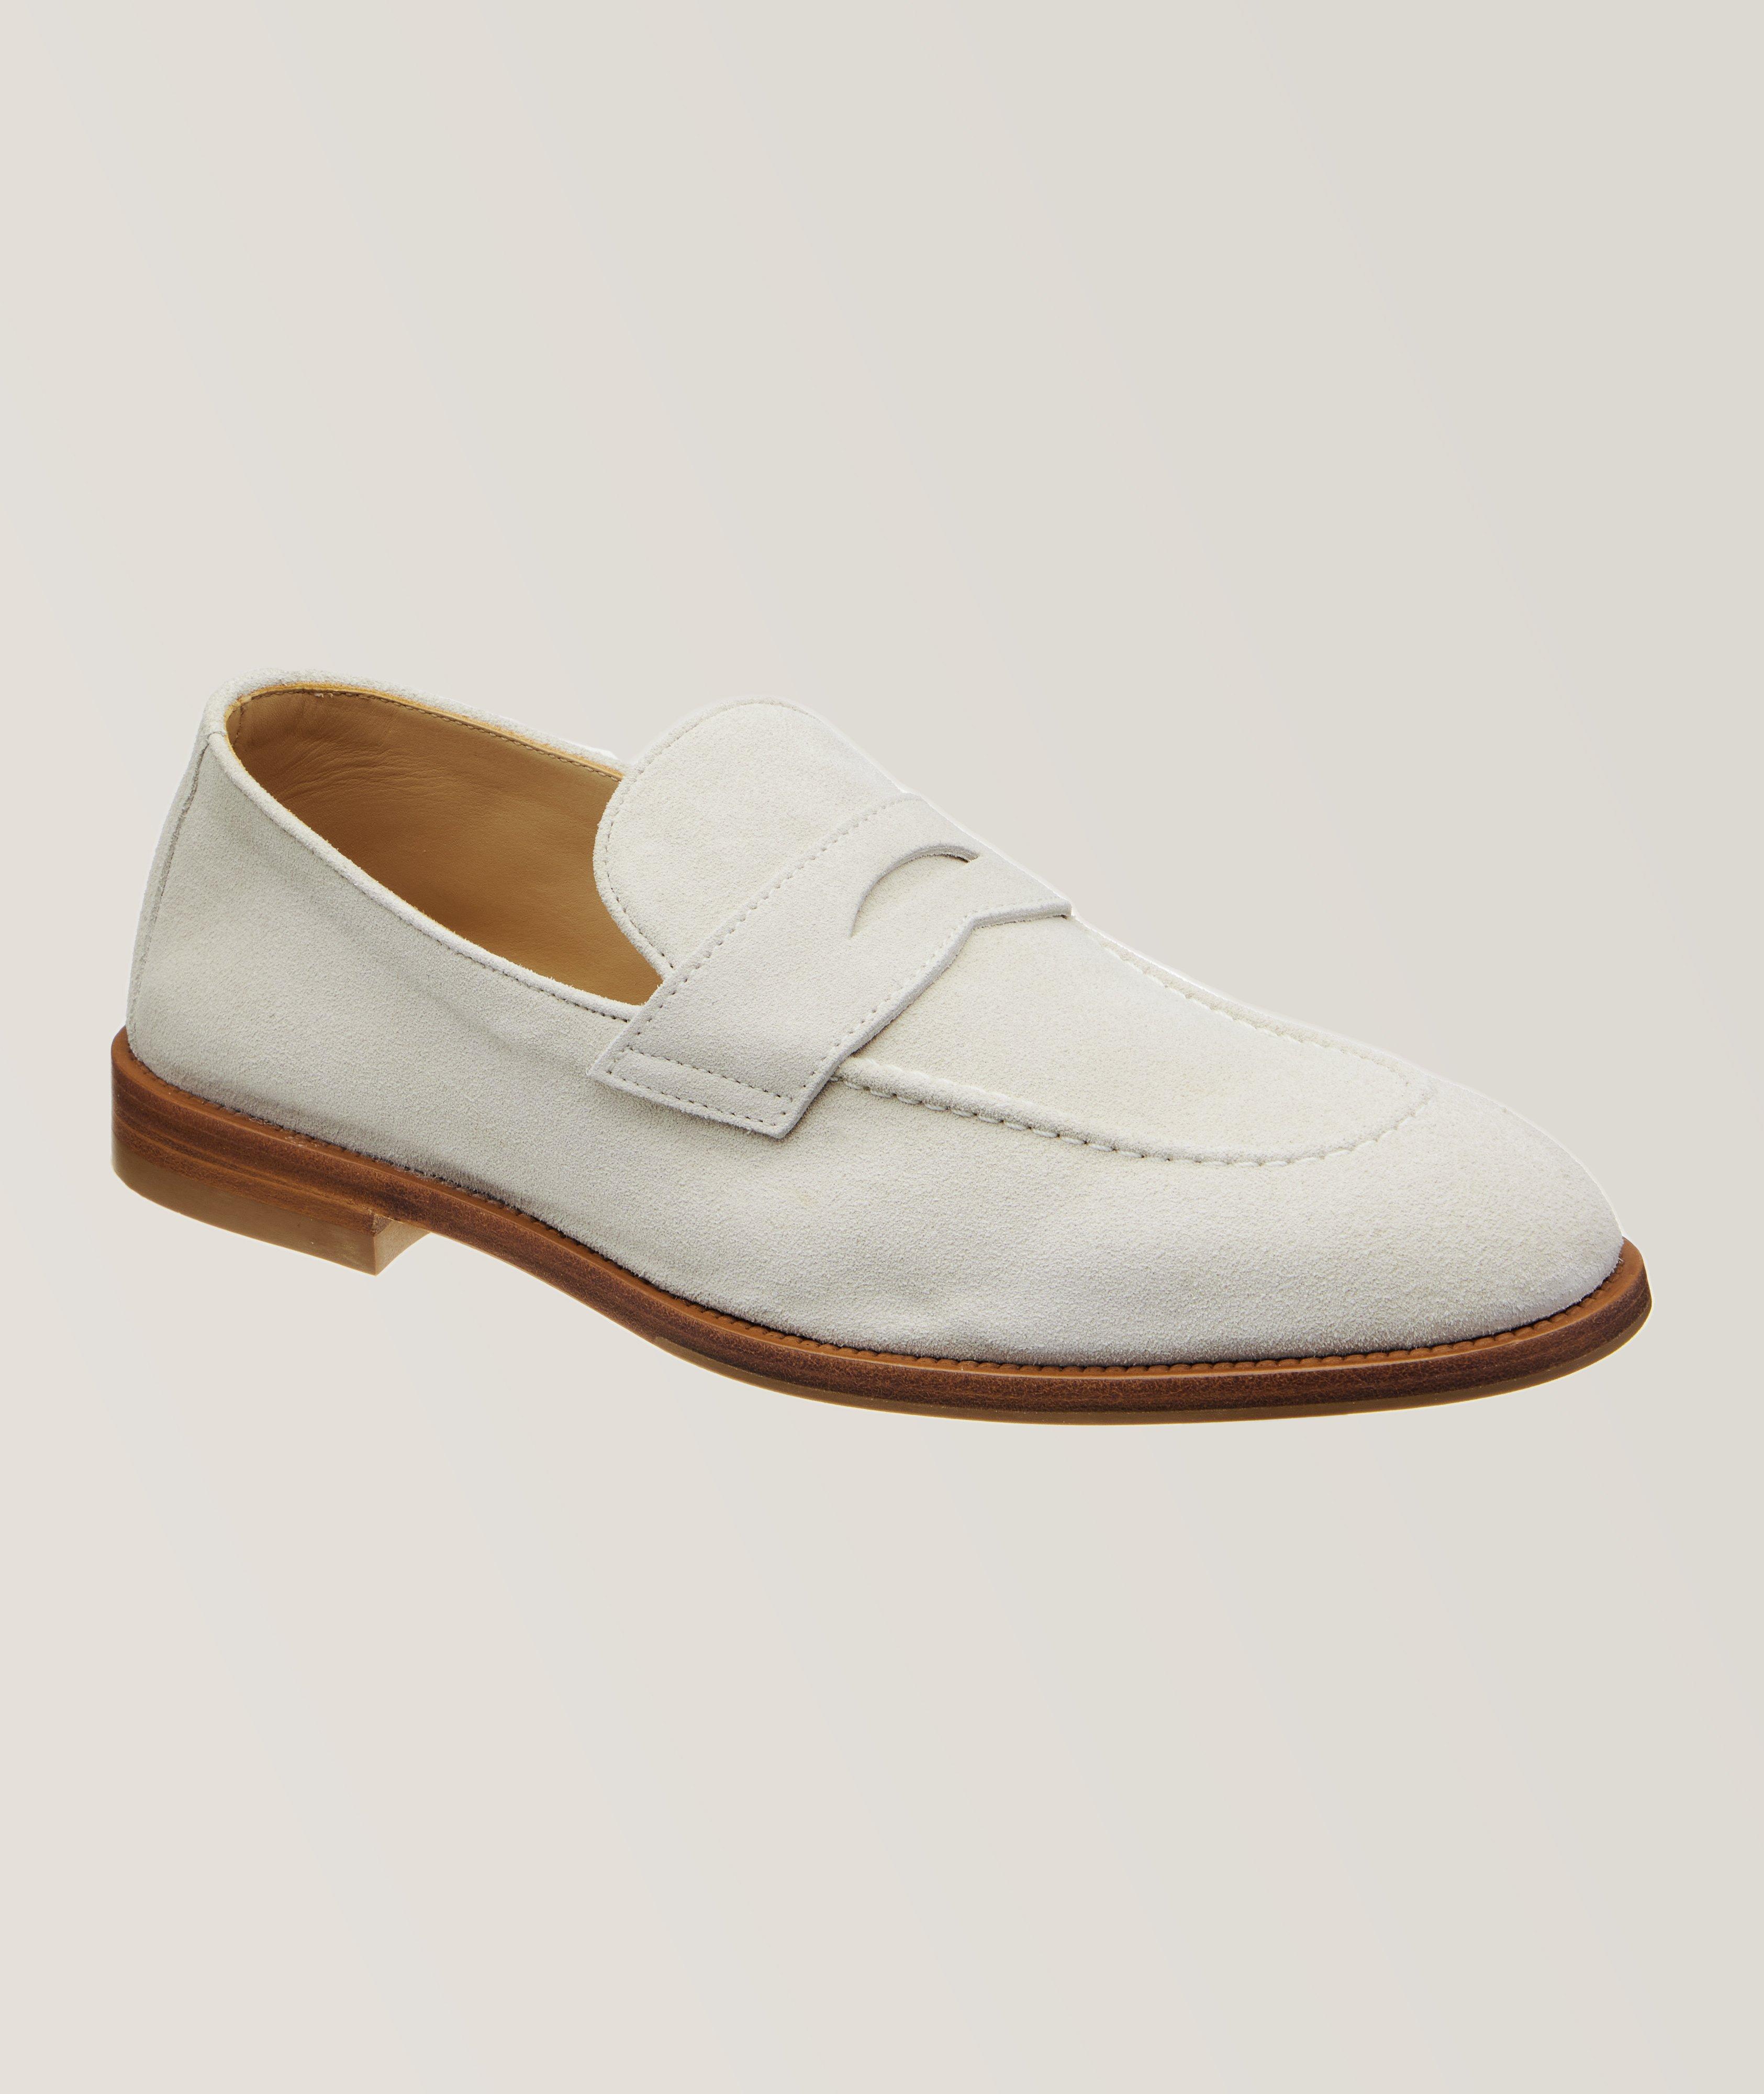 Suede Leather Flex Penny Loafers image 0